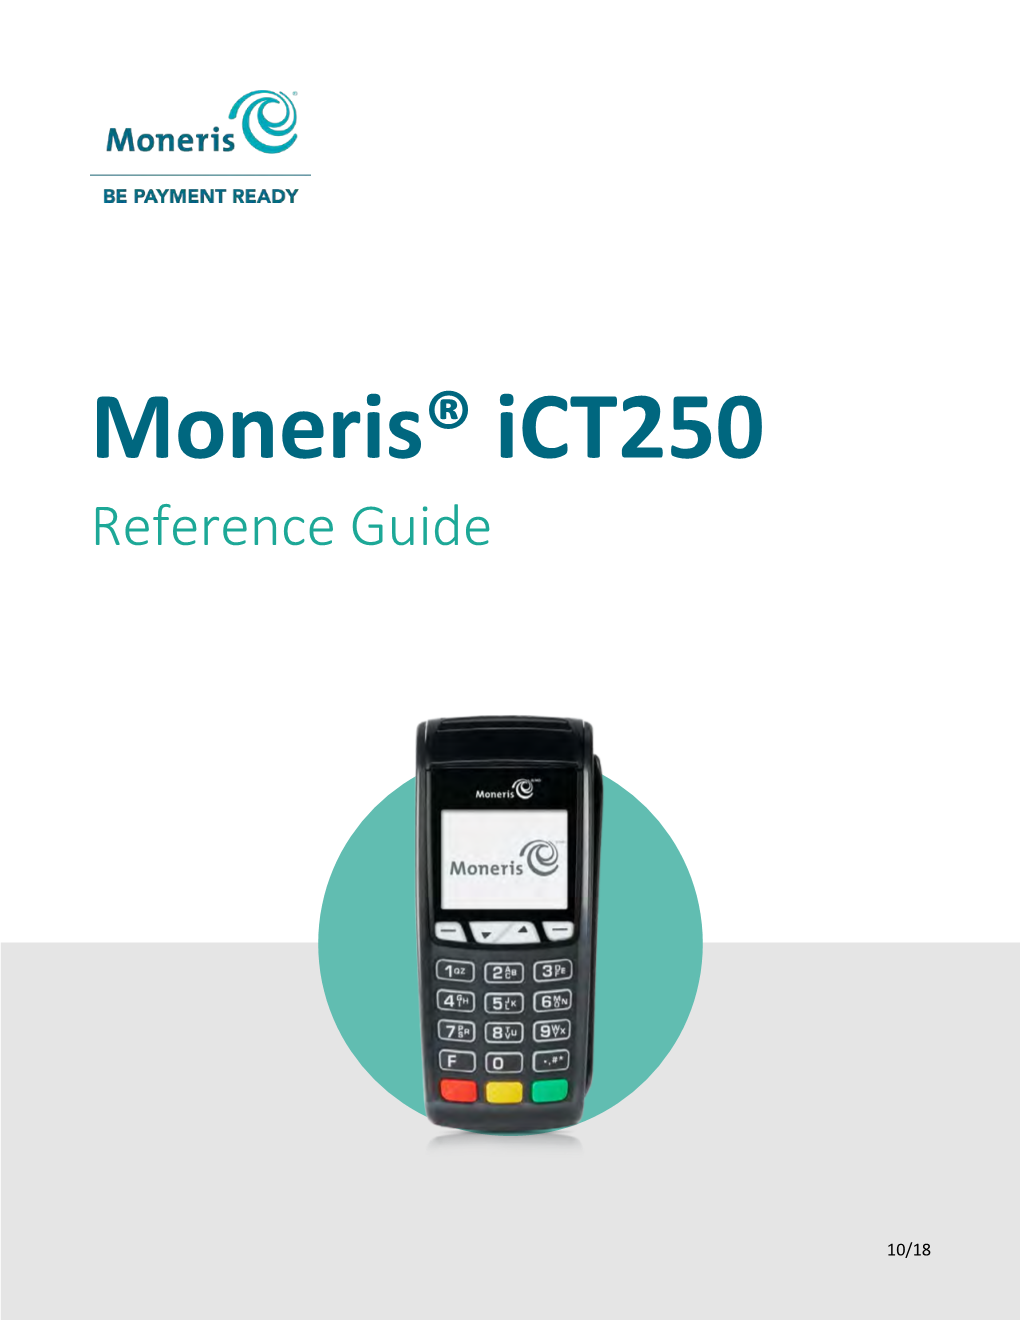 Moneris Ict250: Reference Guide